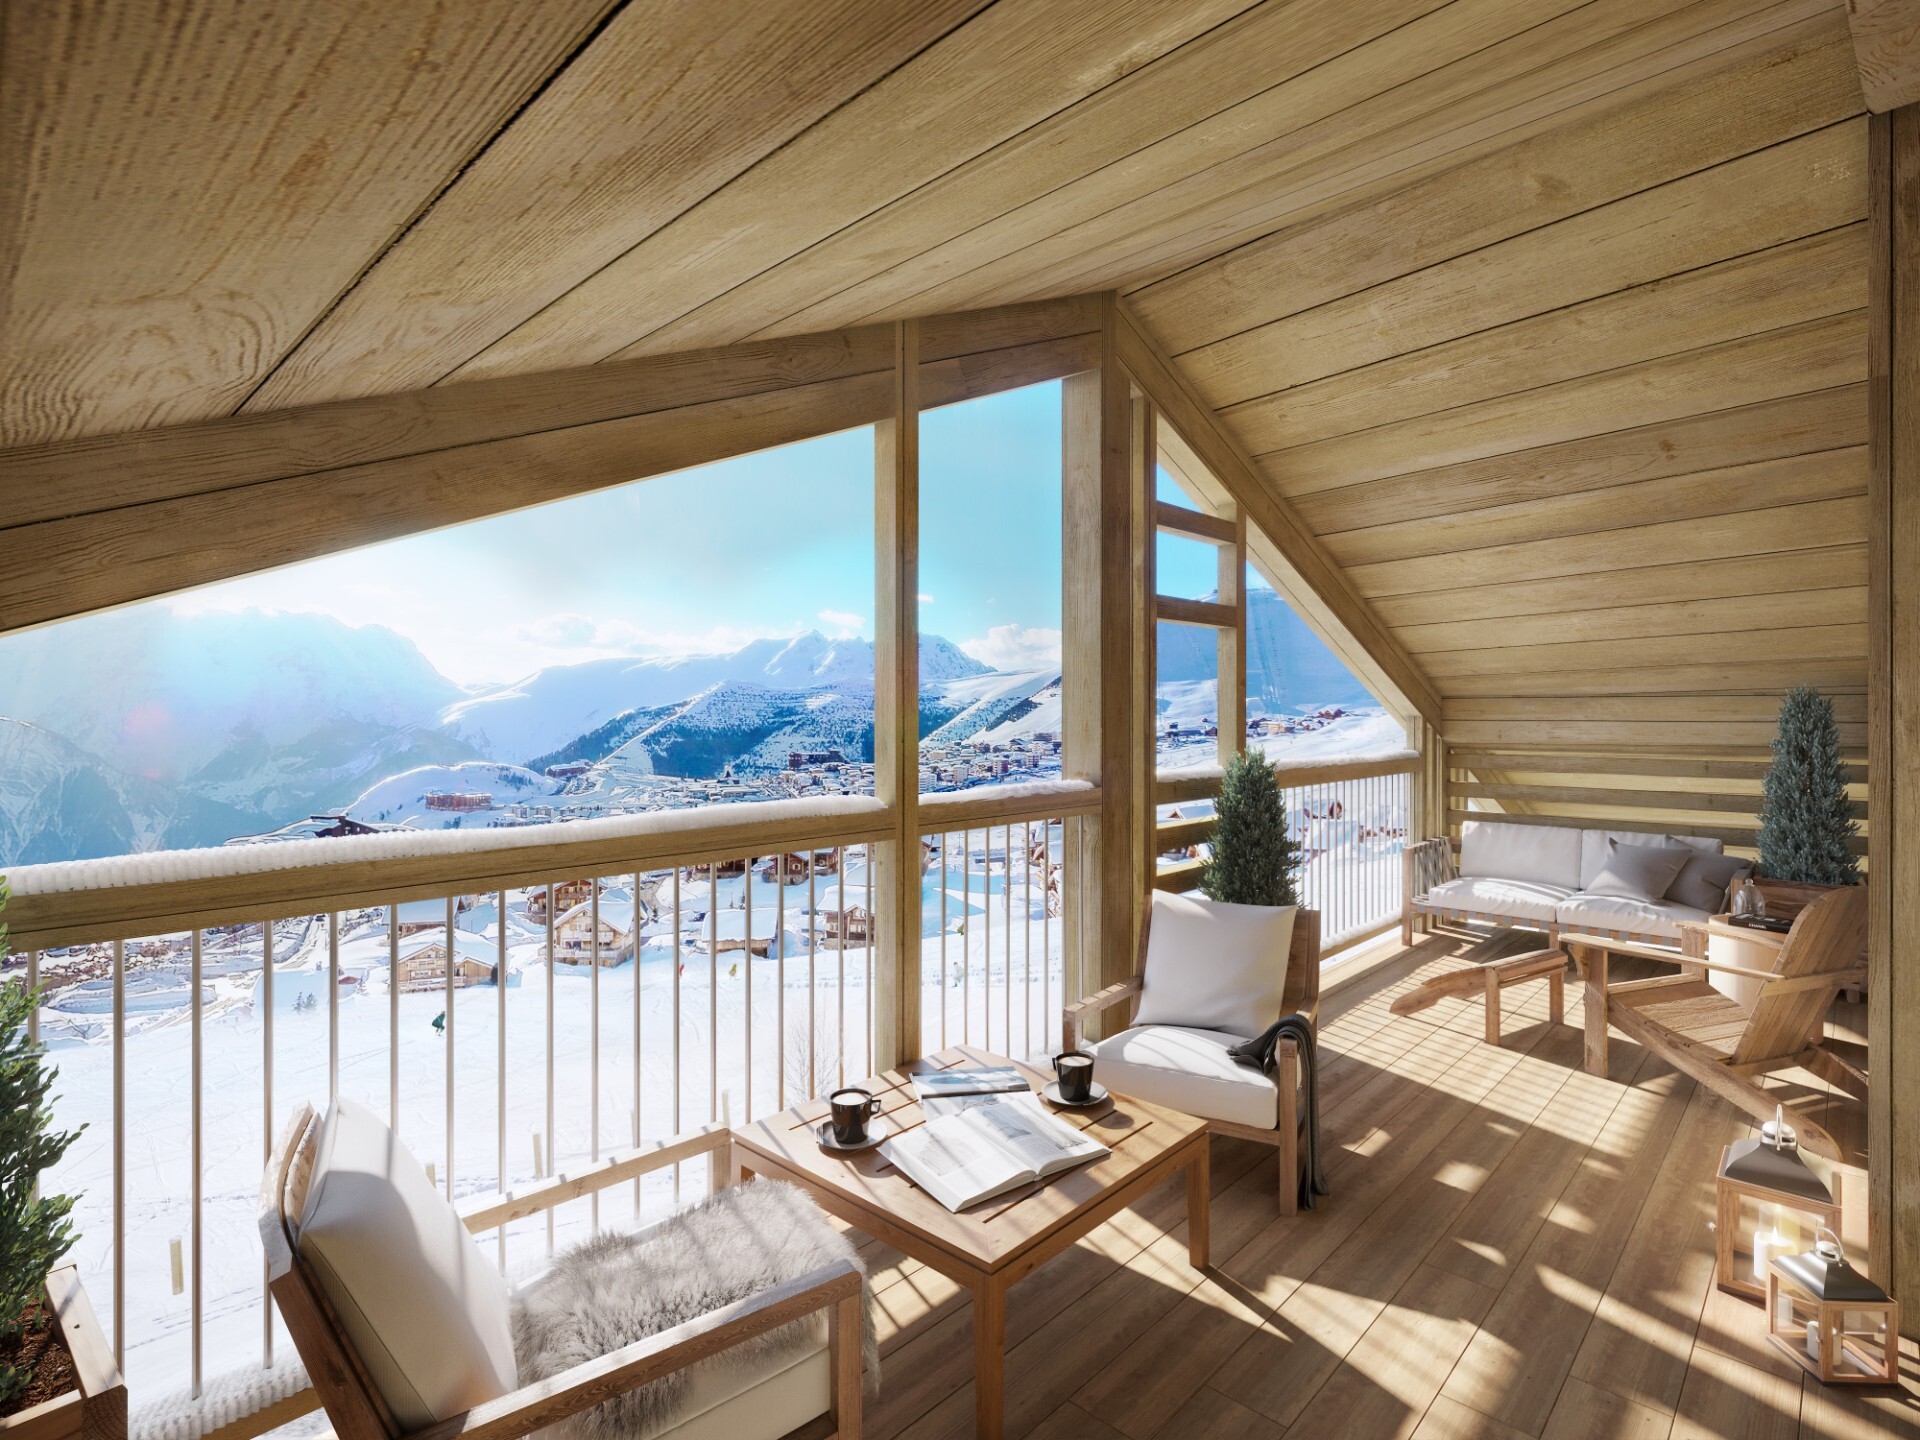 Immaculately presented ski apartment for sale in the heart of Alpe d'Huez, Rhone-Alpes 